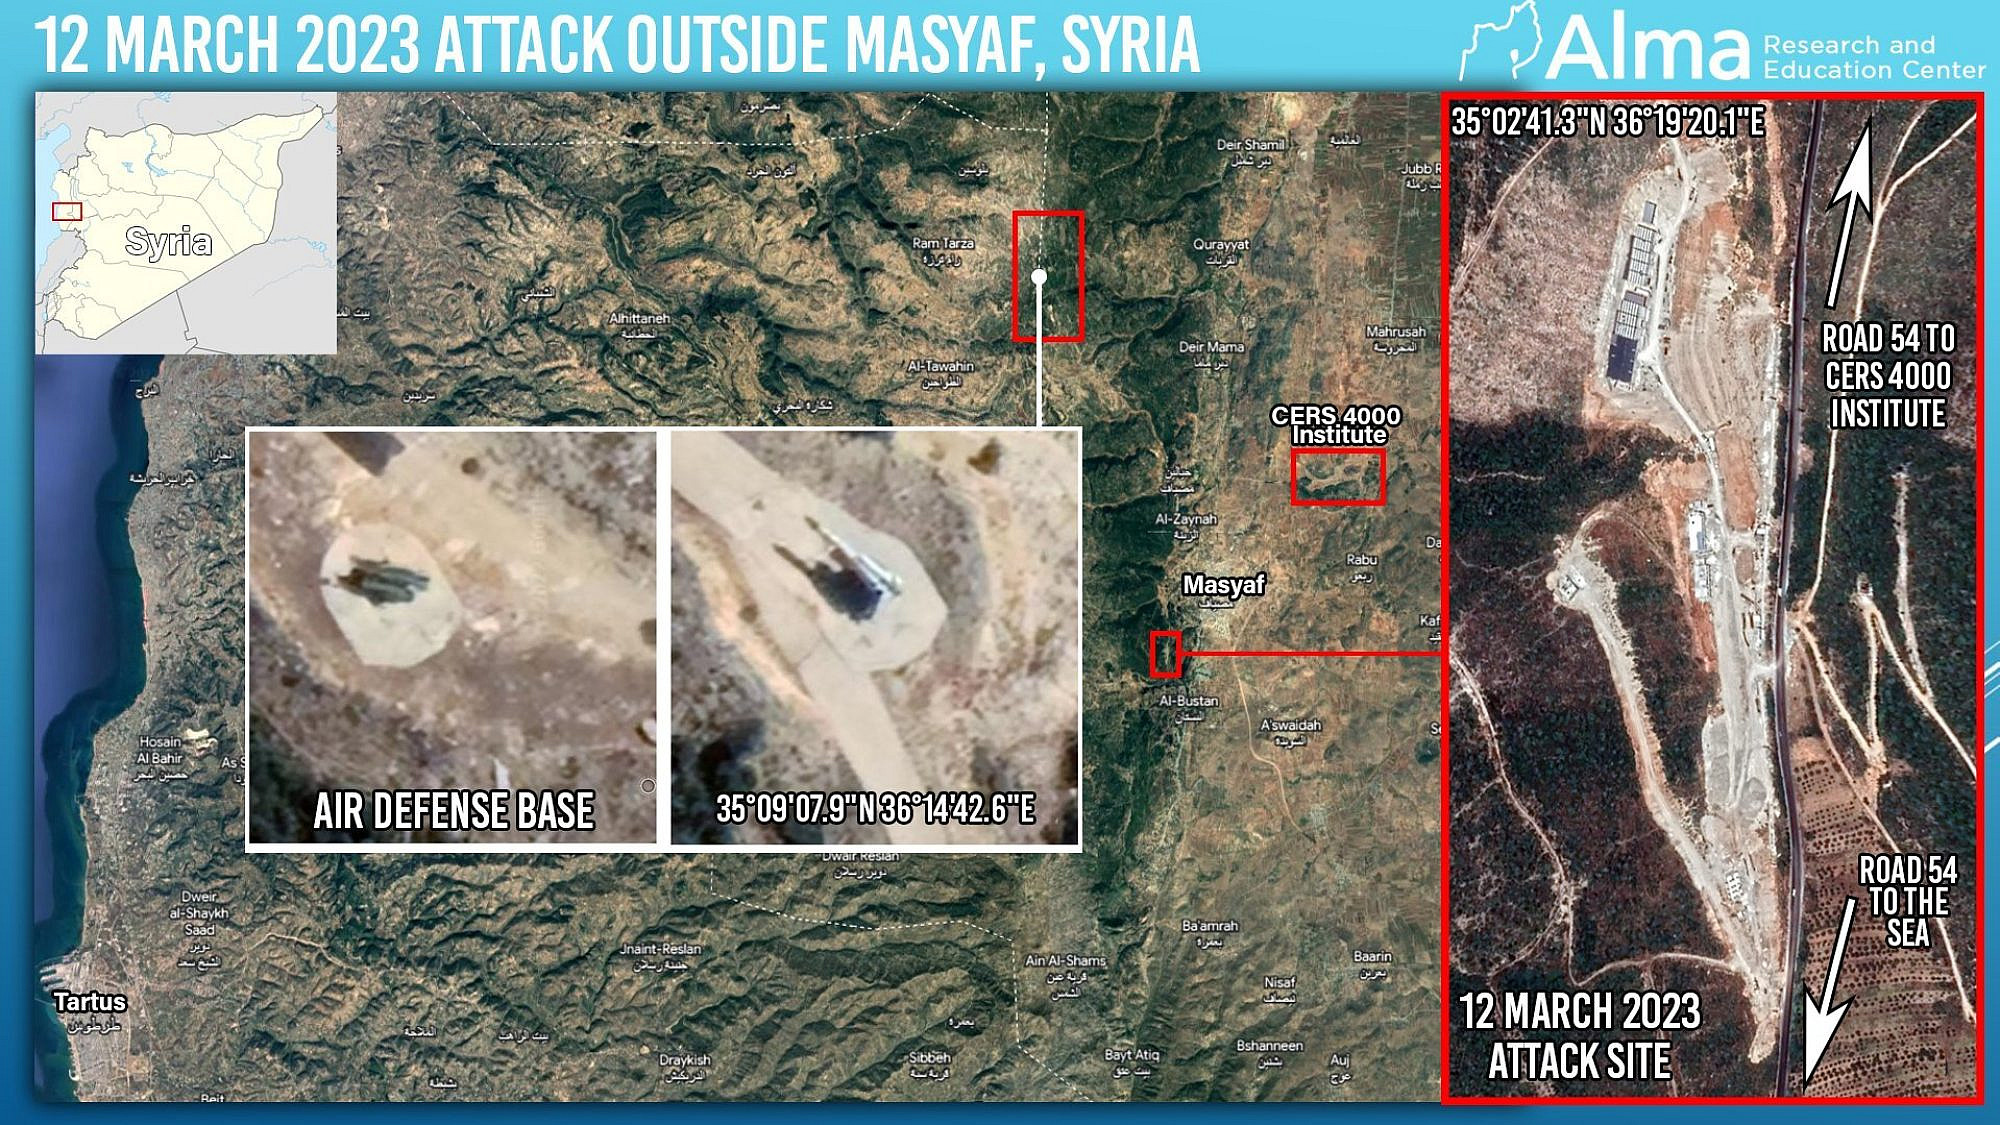 A daytime airstrike in Syria on March 12, 2023 that has been attributed to Israel may have been linked to Hezbollah's precision-missile program. Credit: Alma Center.